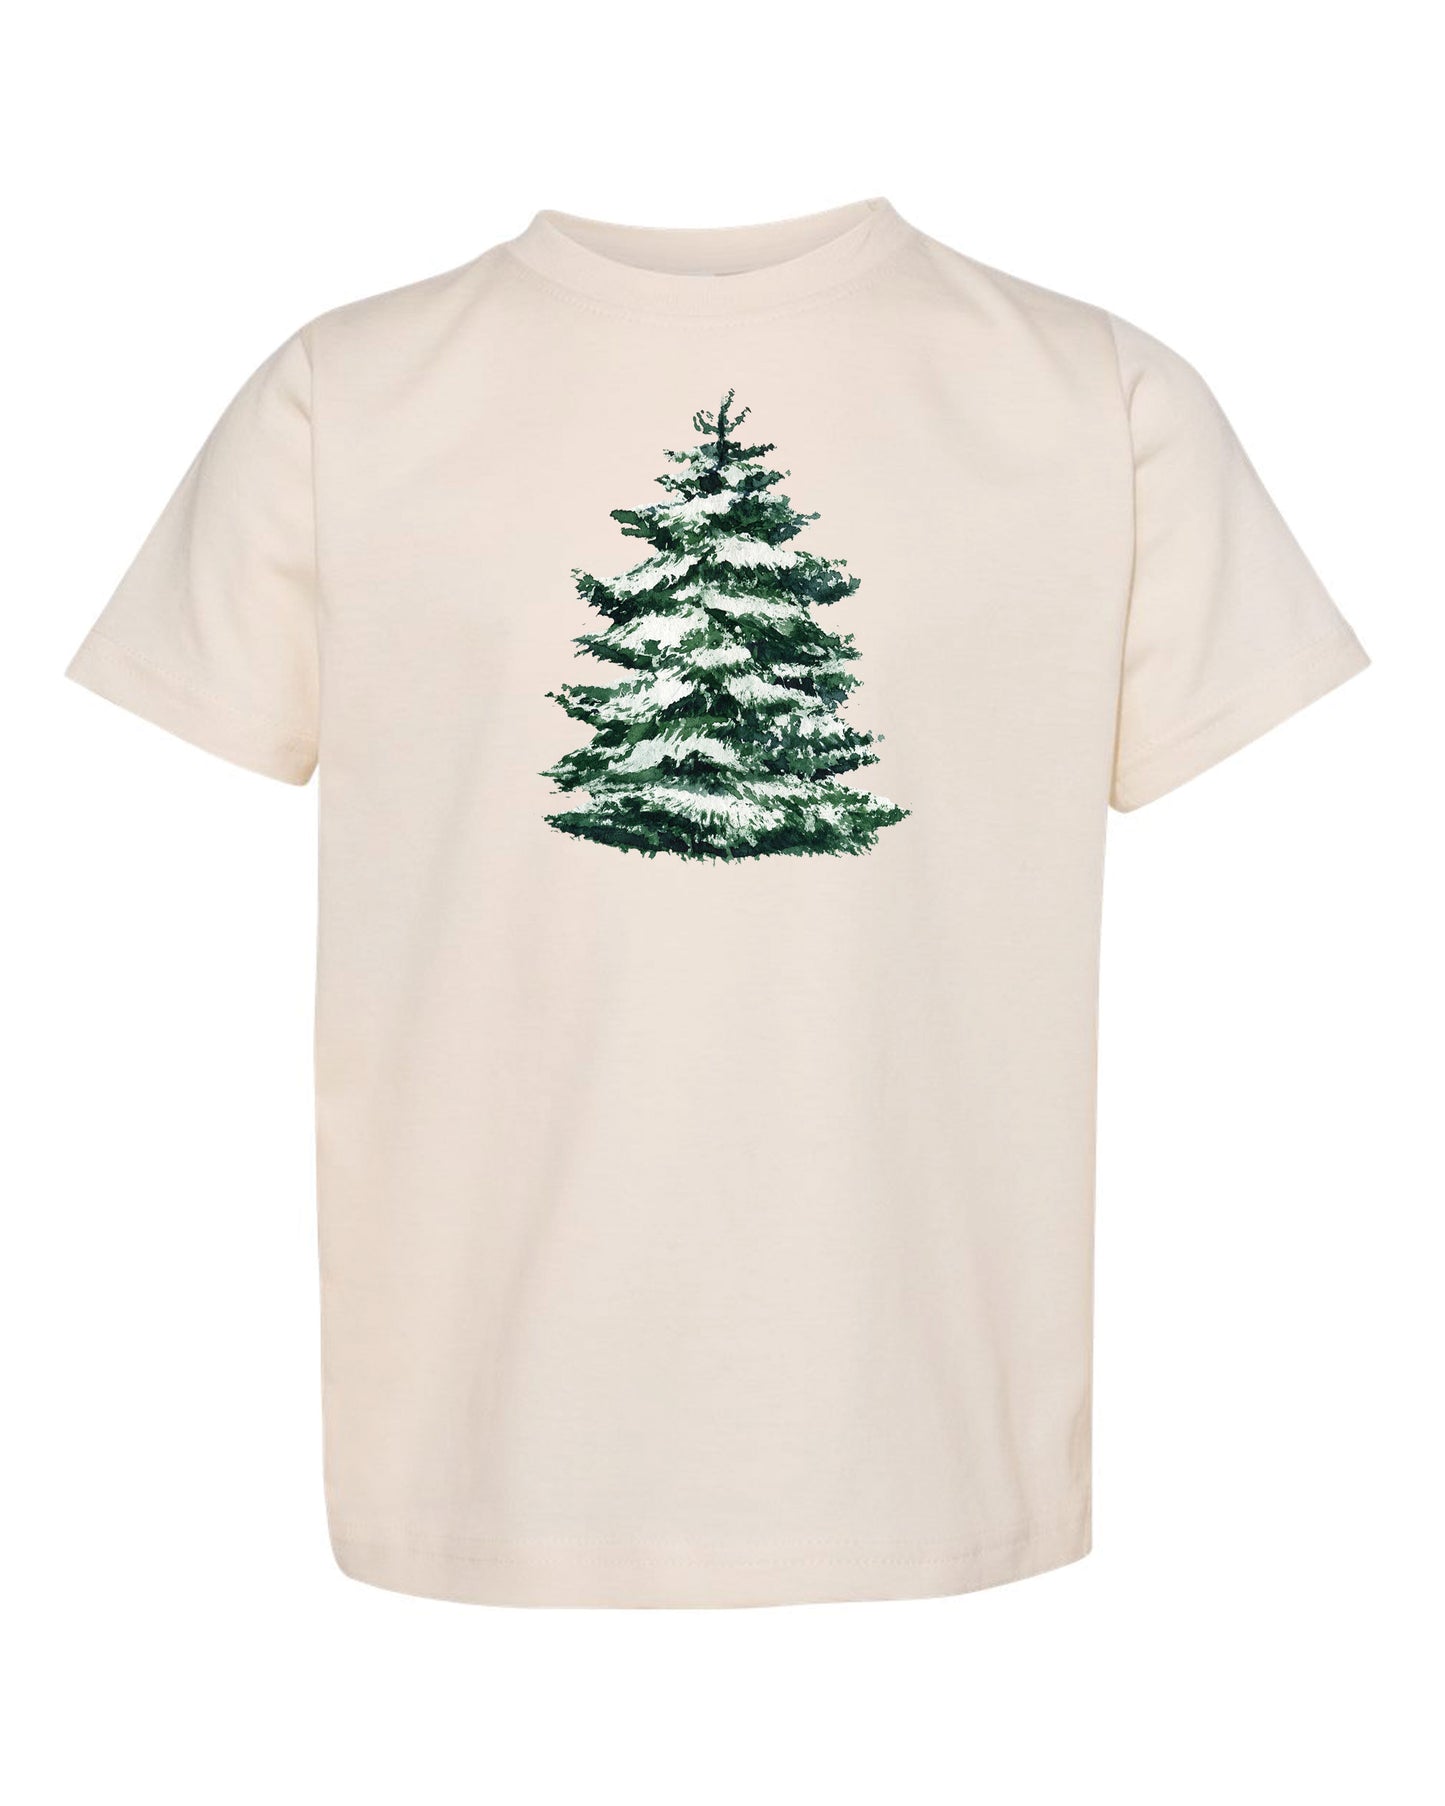 Winter Tree | Kids Tee-Kids Tees-Sister Shirts-Sister Shirts, Cute & Custom Tees for Mama & Littles in Trussville, Alabama.